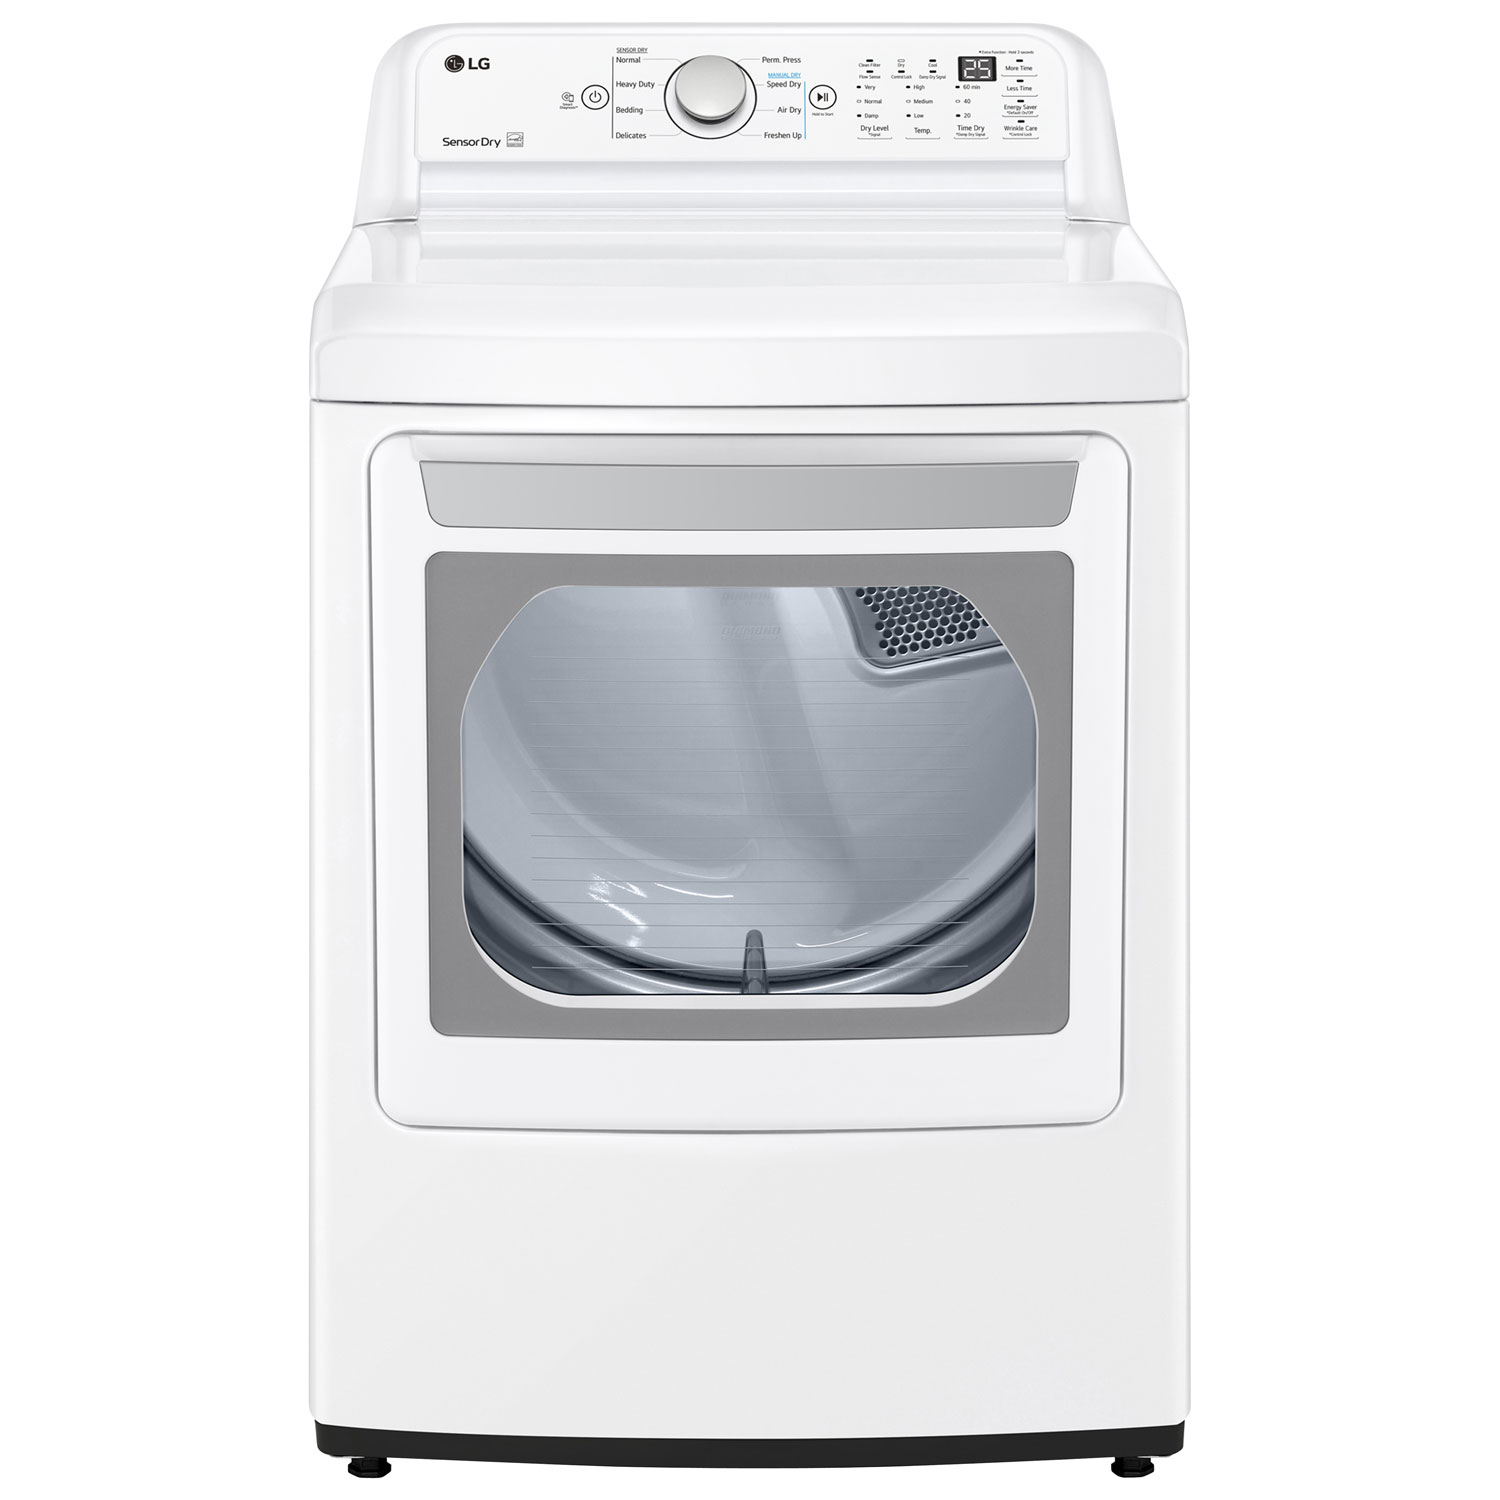 LG 7.4 Cu. Ft. Electric Dryer (DLE7150W) - White